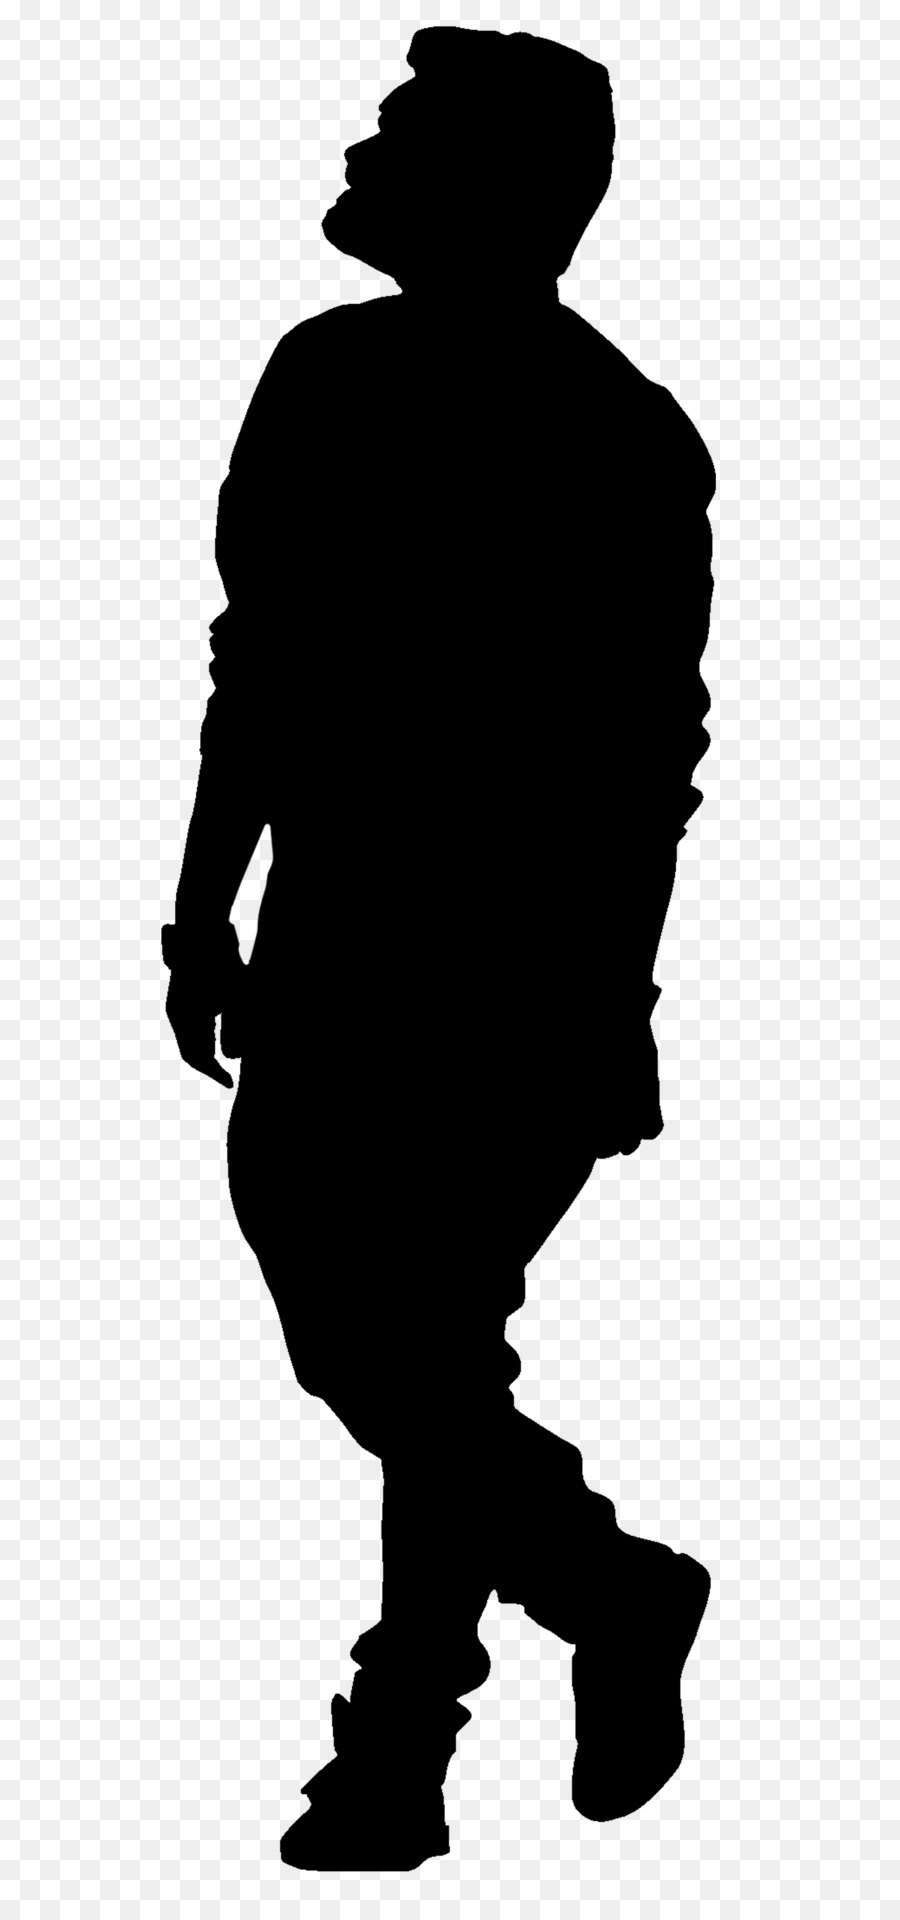 Image Silhouette Model Drawing Can Stock Photo -  png download - 722*1920 - Free Transparent Silhouette png Download.